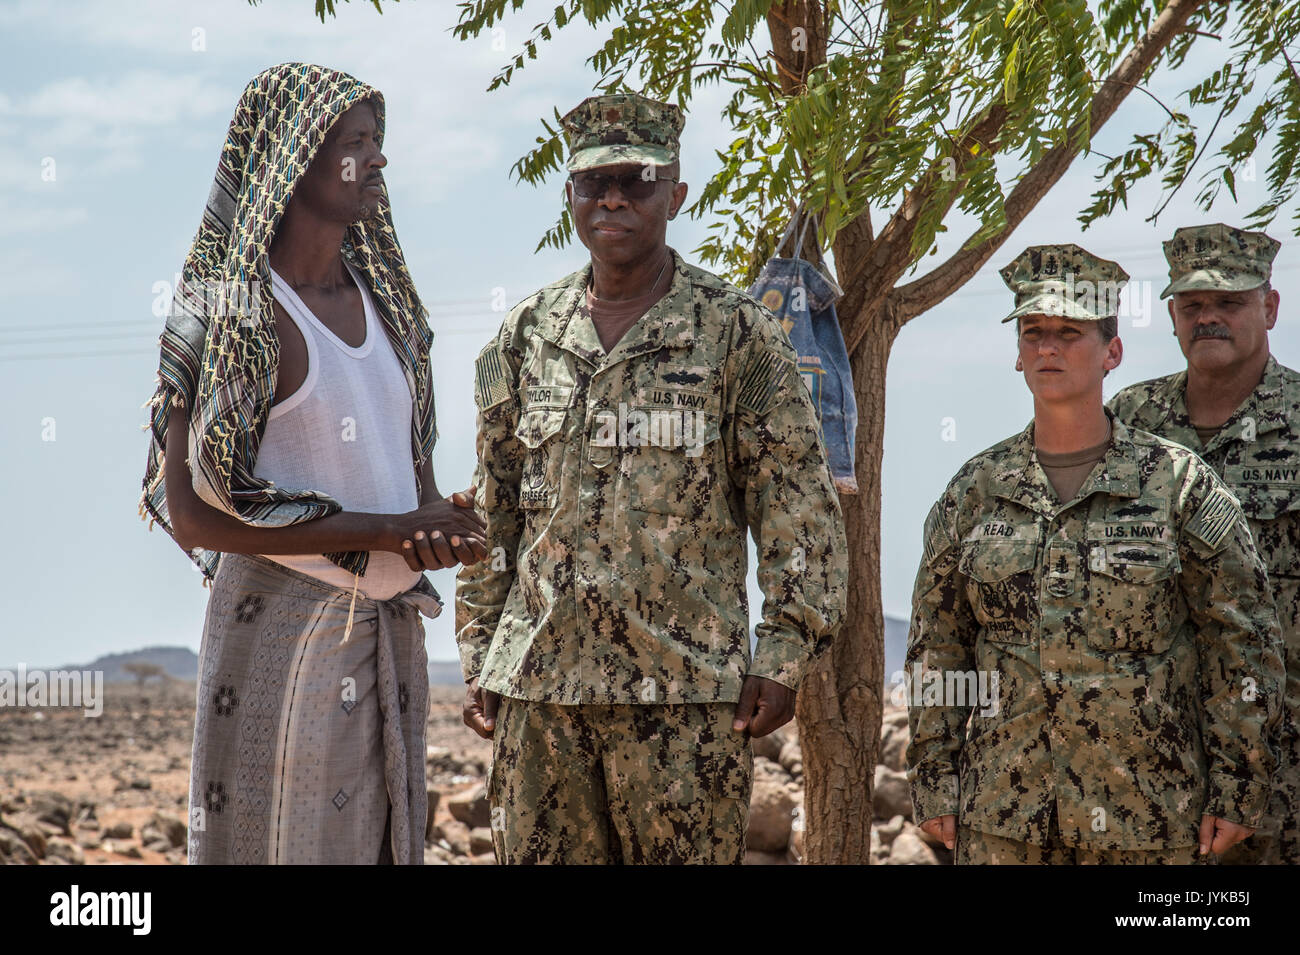 U.S. Navy Lt. Cmdr. James O. Taylor, commander of Naval Mobile Construction Battalion 133, is introduced to Village Chief Hassan Diama as Seabees assigned to Combined Joint Task Force-Horn of Africa gathered on a construction in the Arta region, Djibouti, during a flag dedication ceremony where they are building a medical center, Aug. 17, 2017. The project was started by NMCB 1 and is being relieved by NMCB 133 who will continue working on the project with plans of completion in 2018. (U.S. Air National Guard photo by Tech. Sgt. Joe Harwood) Stock Photo